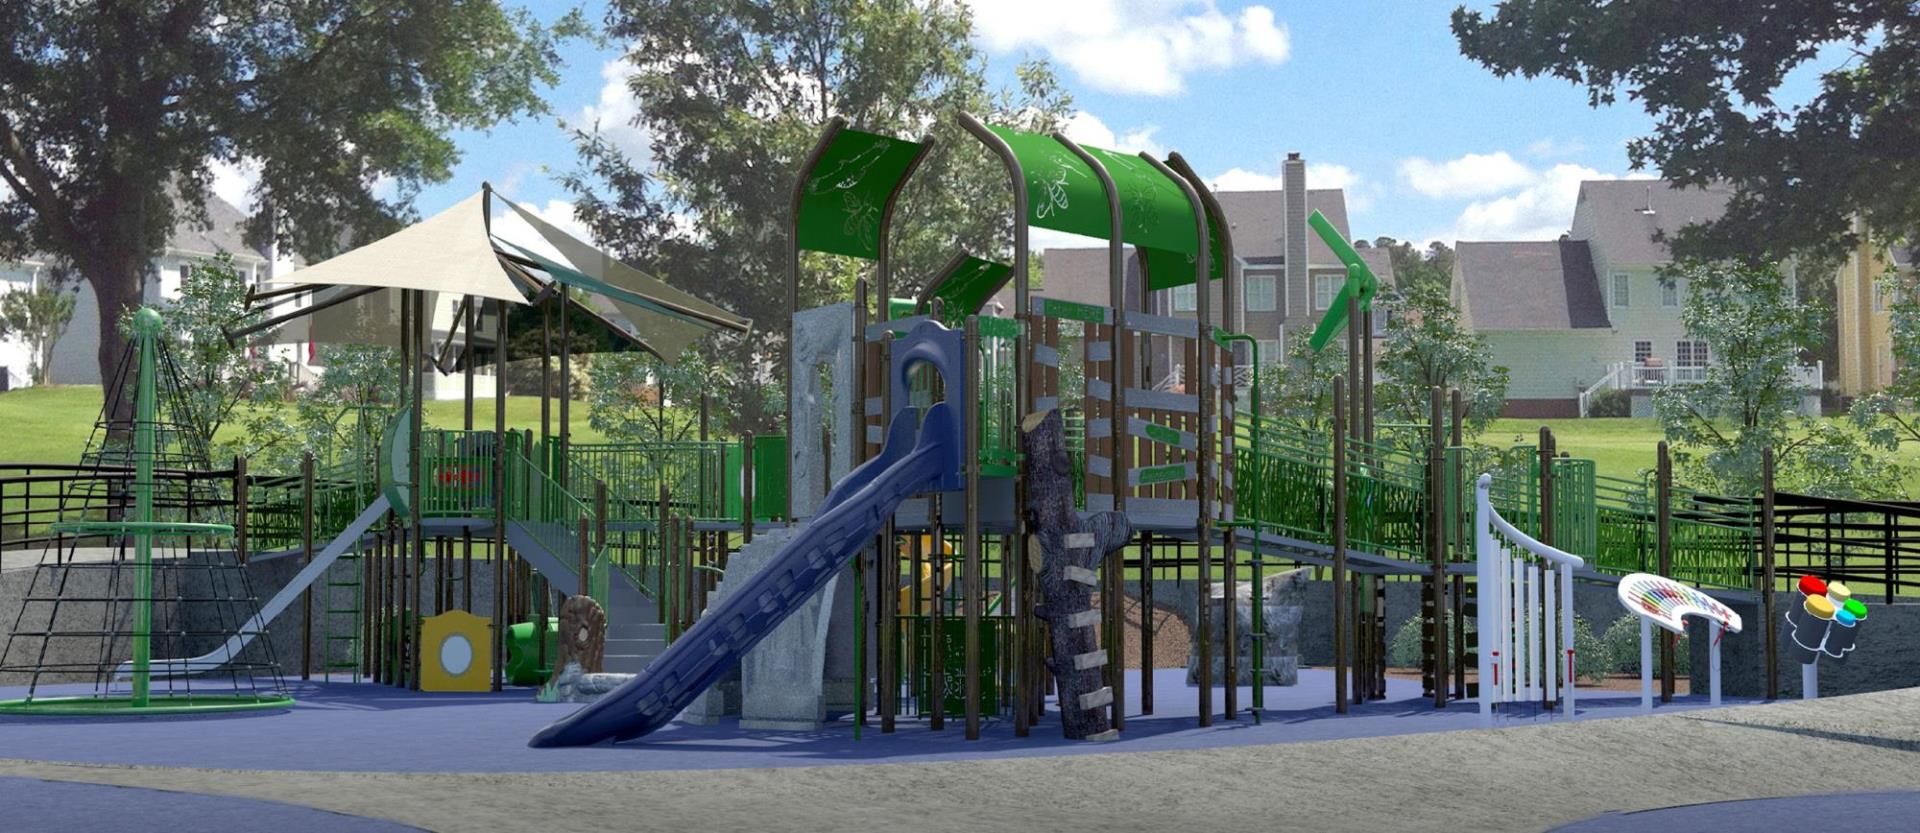 Inclusive playground, more residents coming to Raymore